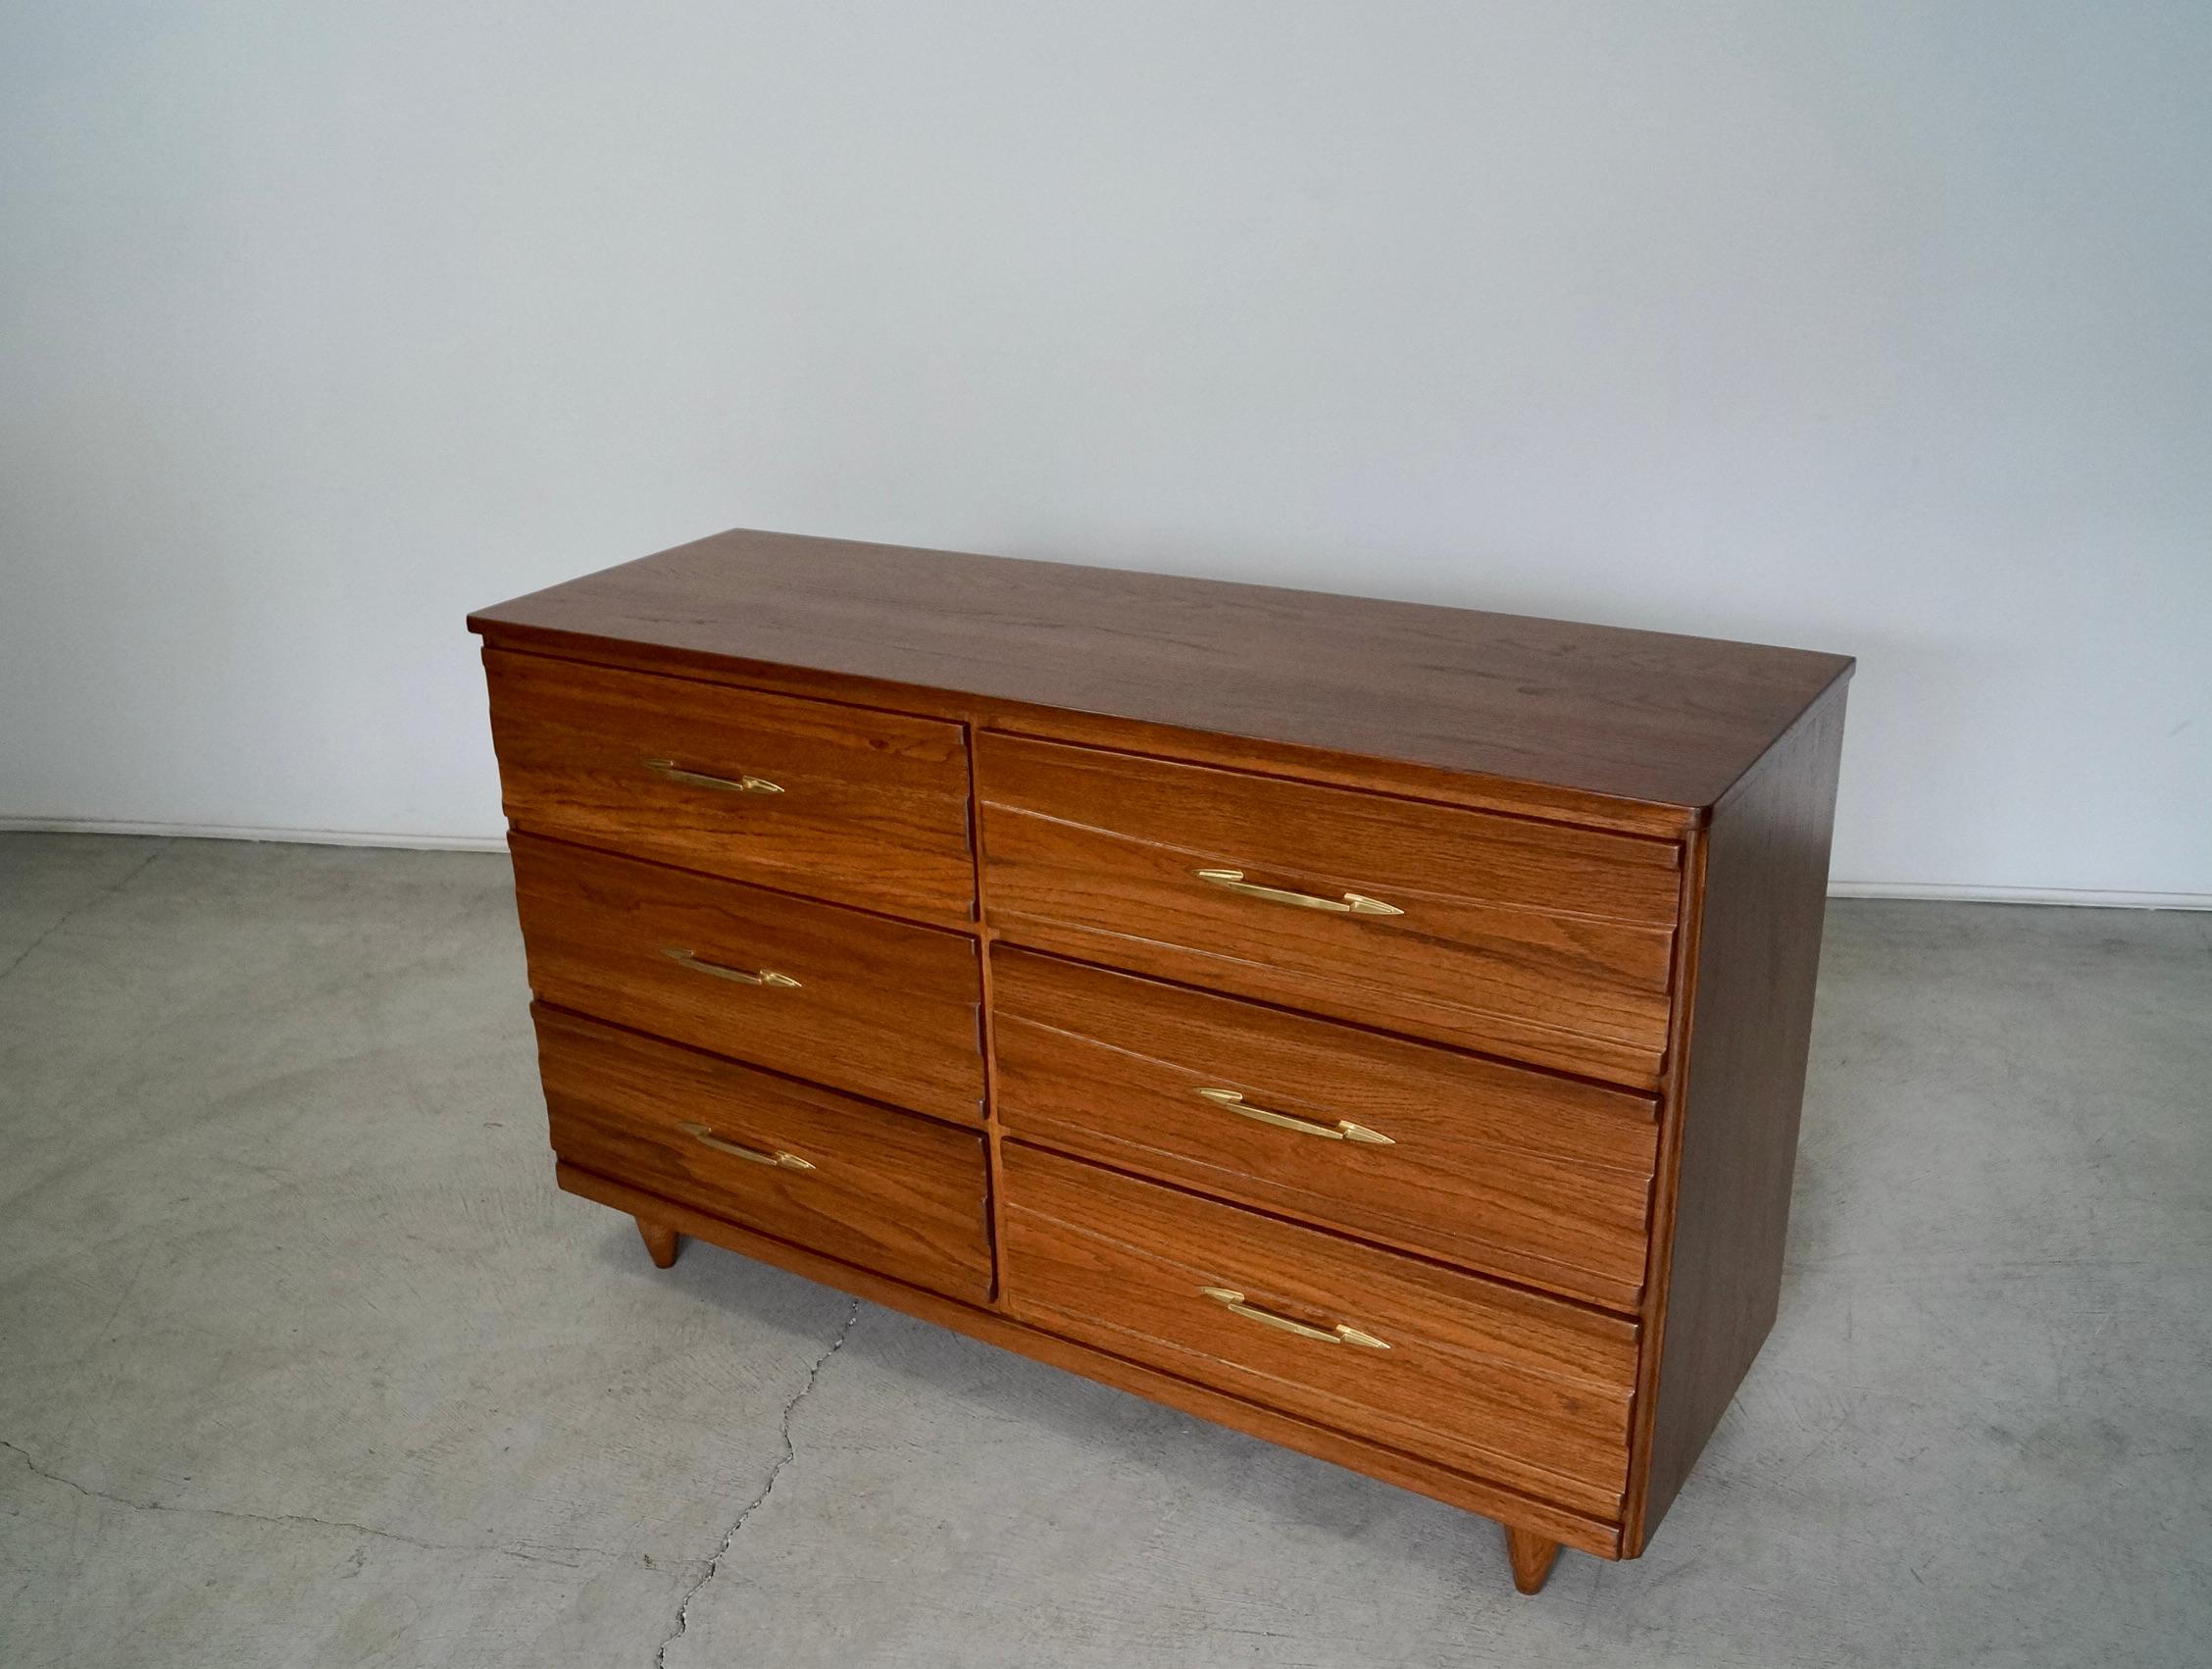 1950's Mid-Century Modern Atomic Dresser In Excellent Condition For Sale In Burbank, CA